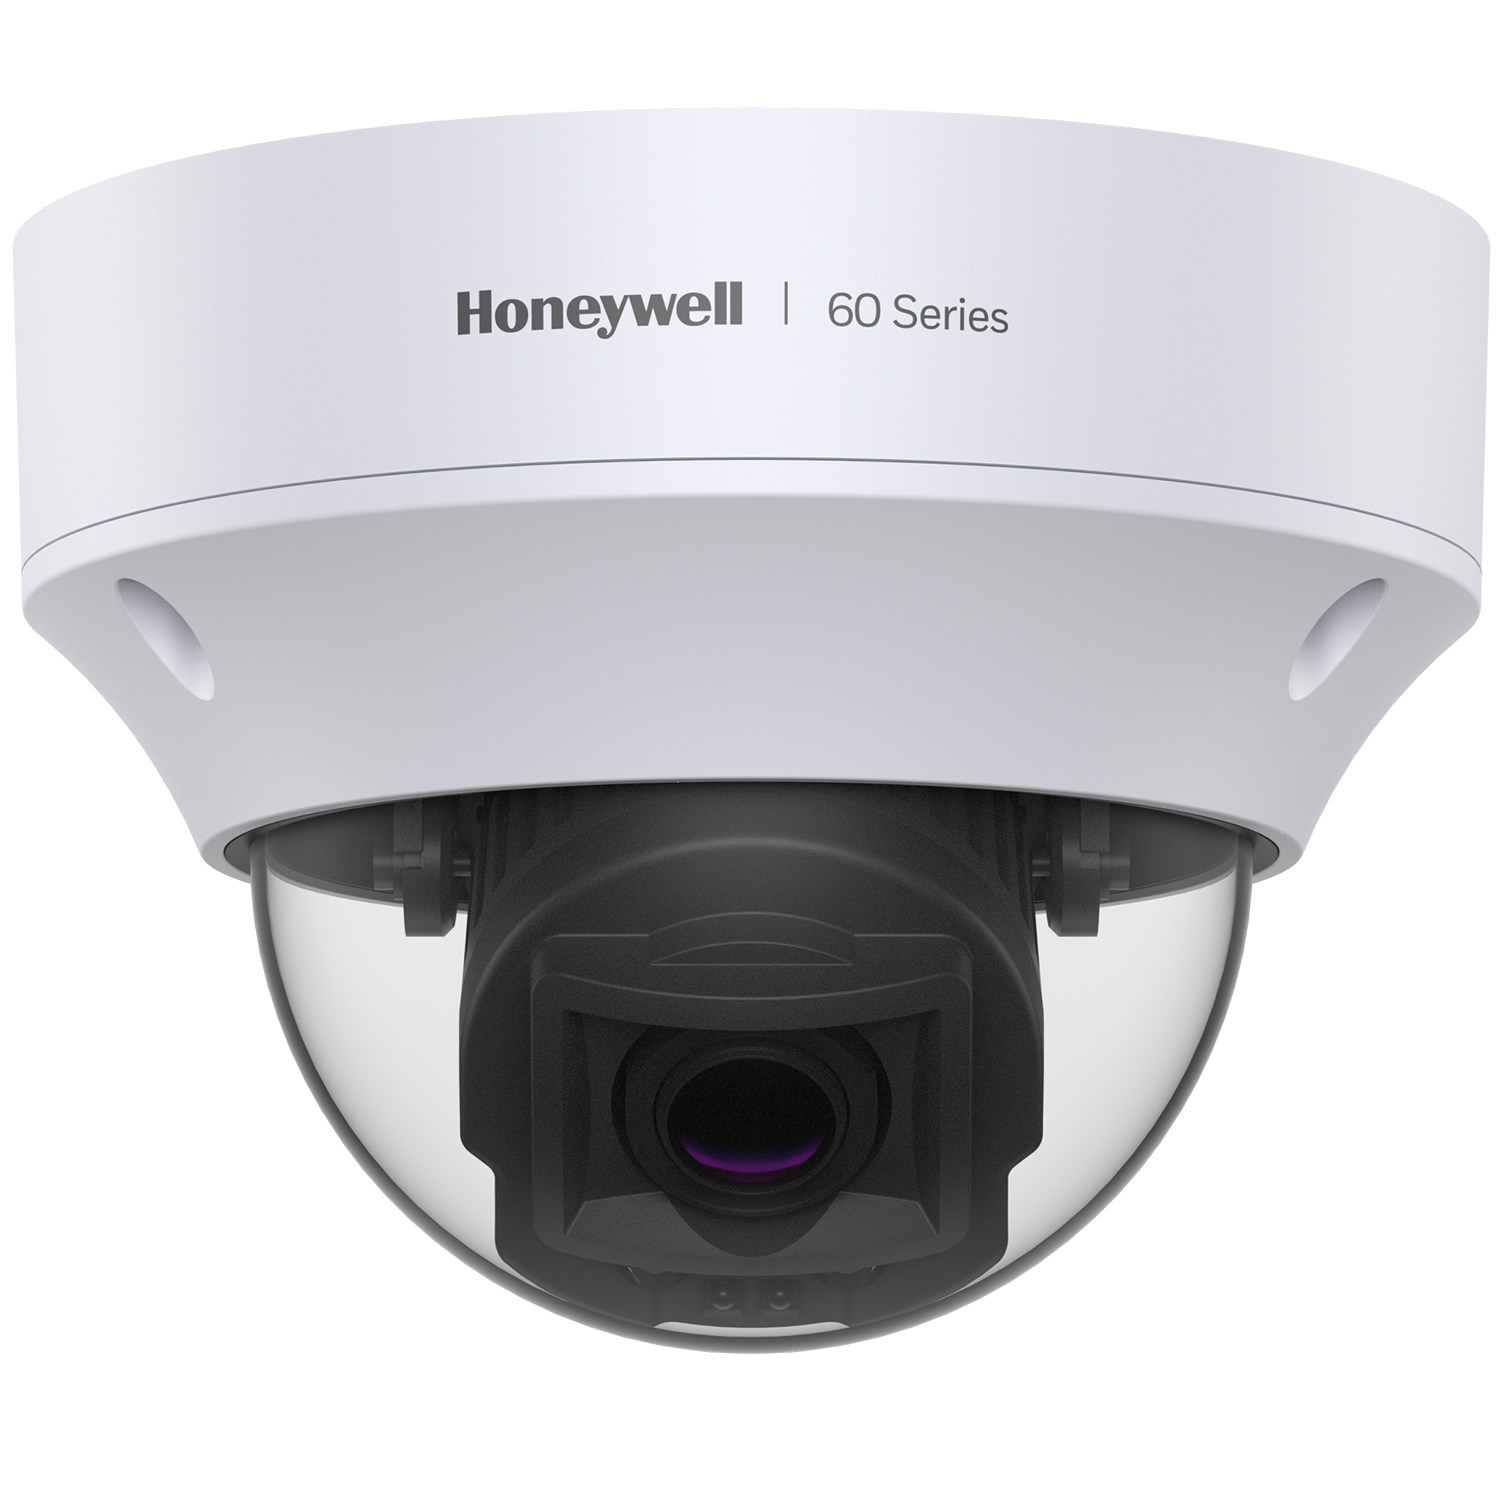 Image for Honeywell Launches 60 Series IP Video 5MP Cameras For Faster Notification And Verification Of Potential Threats